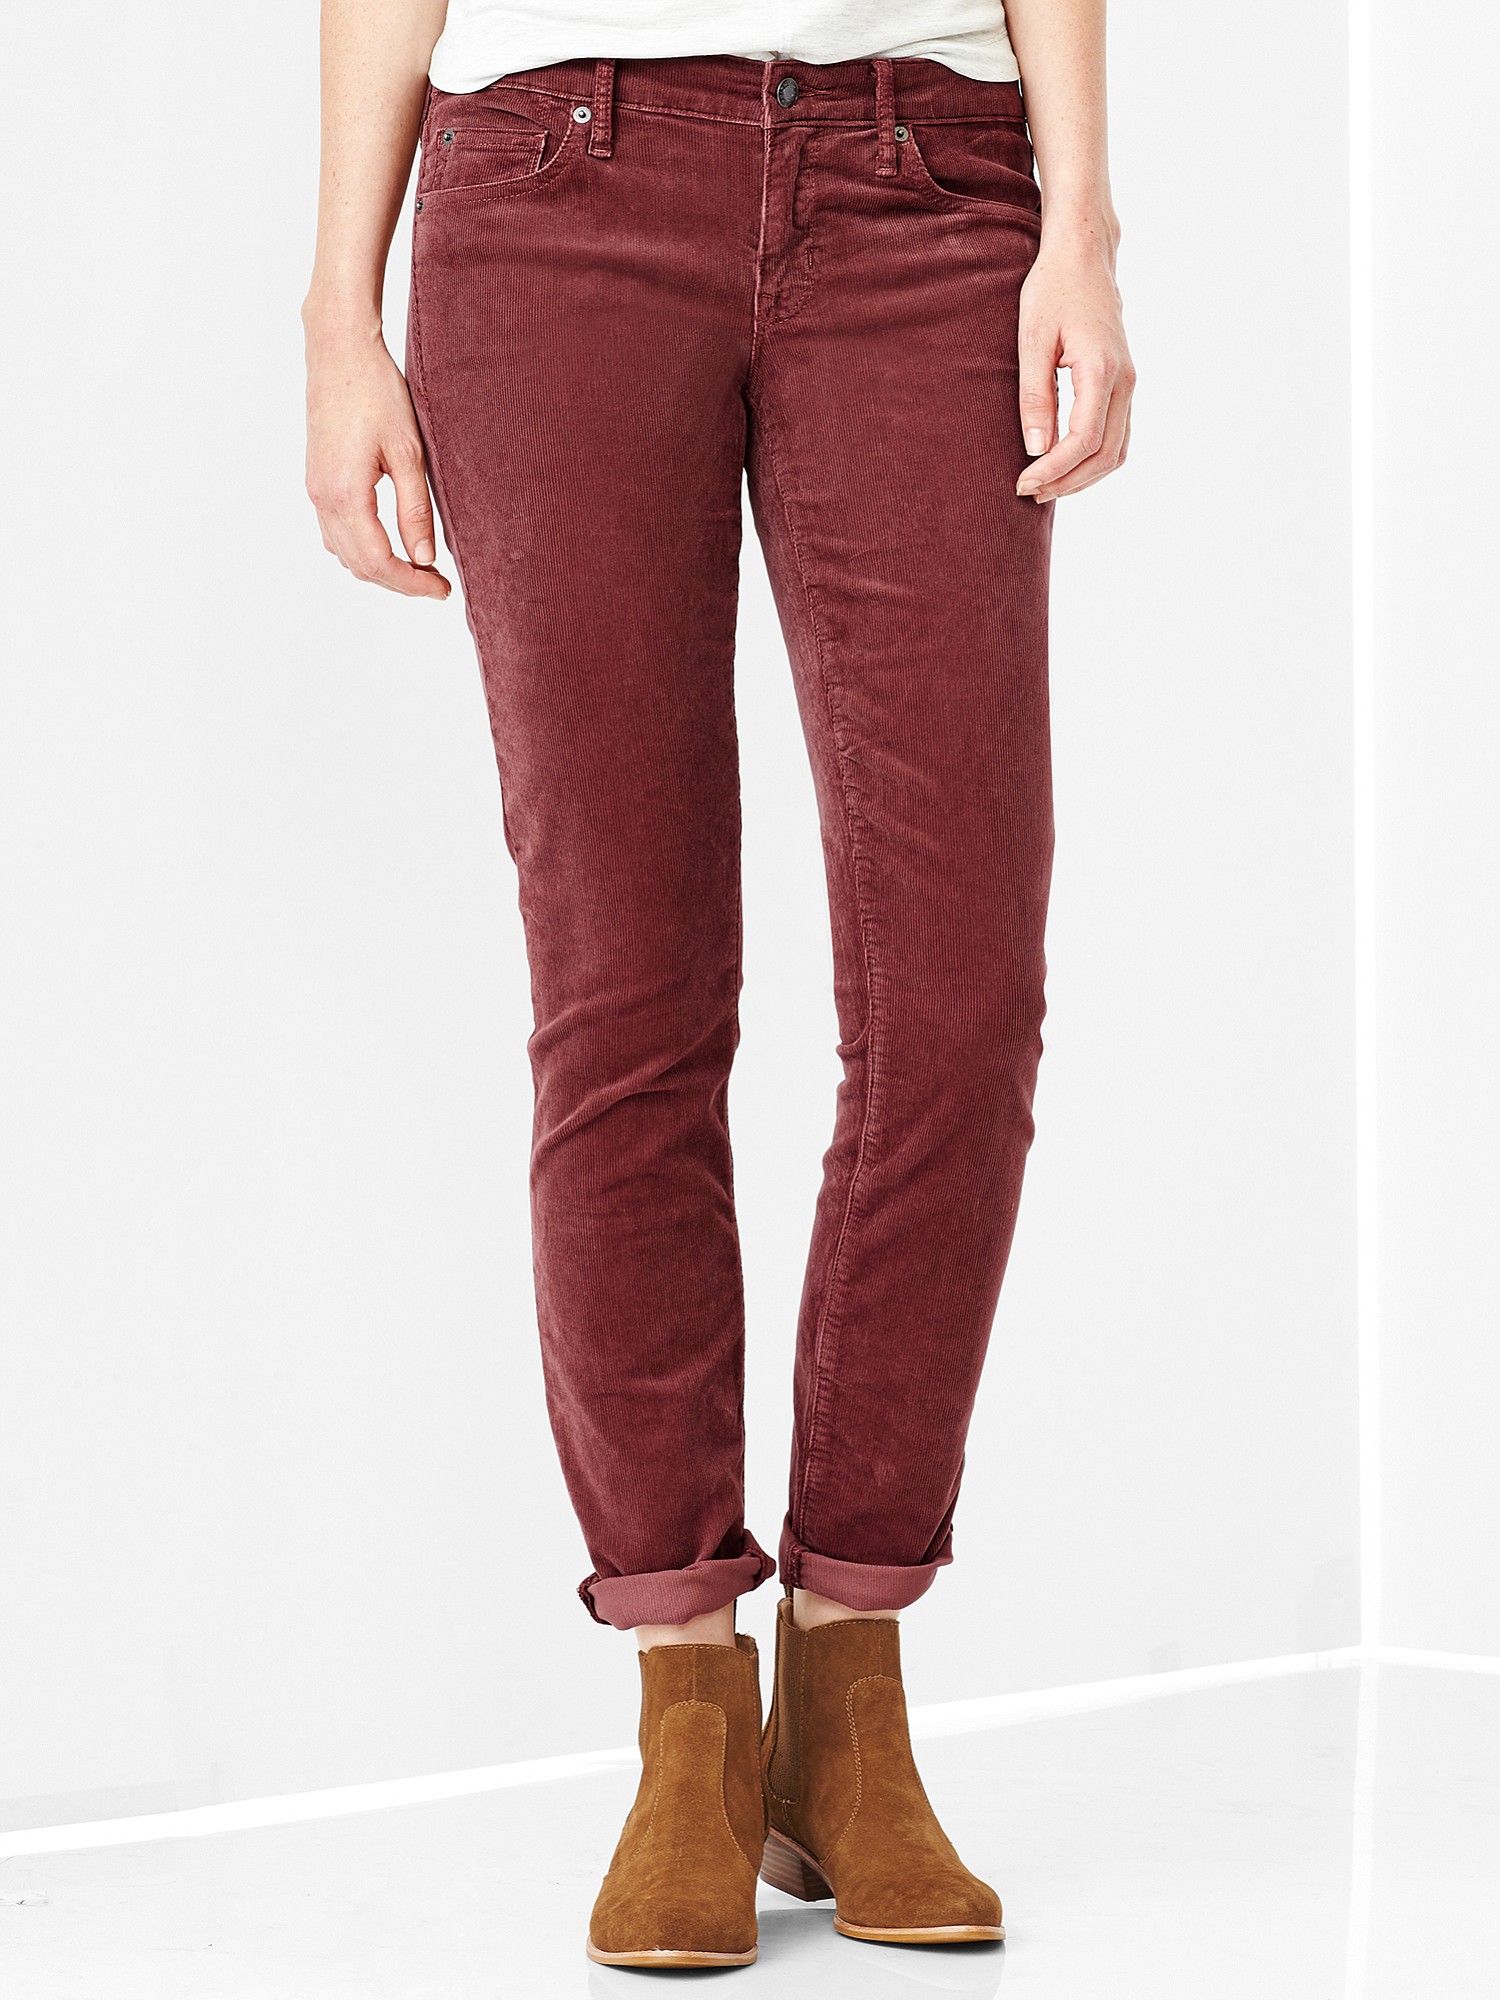 Gap
The 1969 Always Skinny corduroy jeans from Gap illustrate Pantone's color of the year: Marsala.